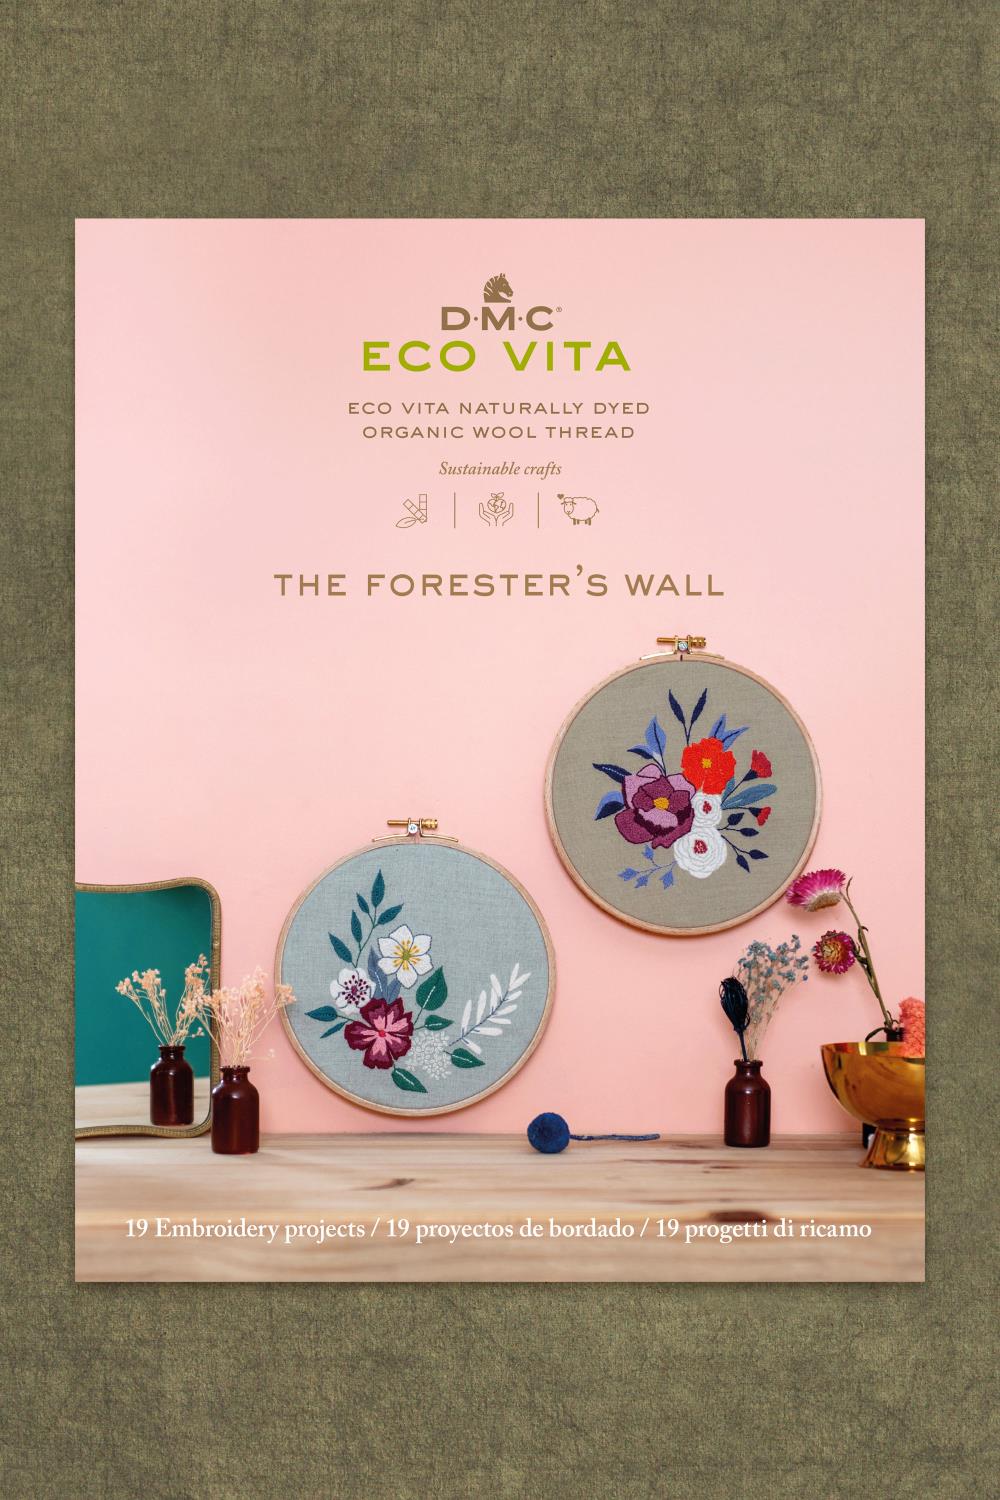 The Forester's Wall - 19 Embroidery projects. DMC Eco Vita.